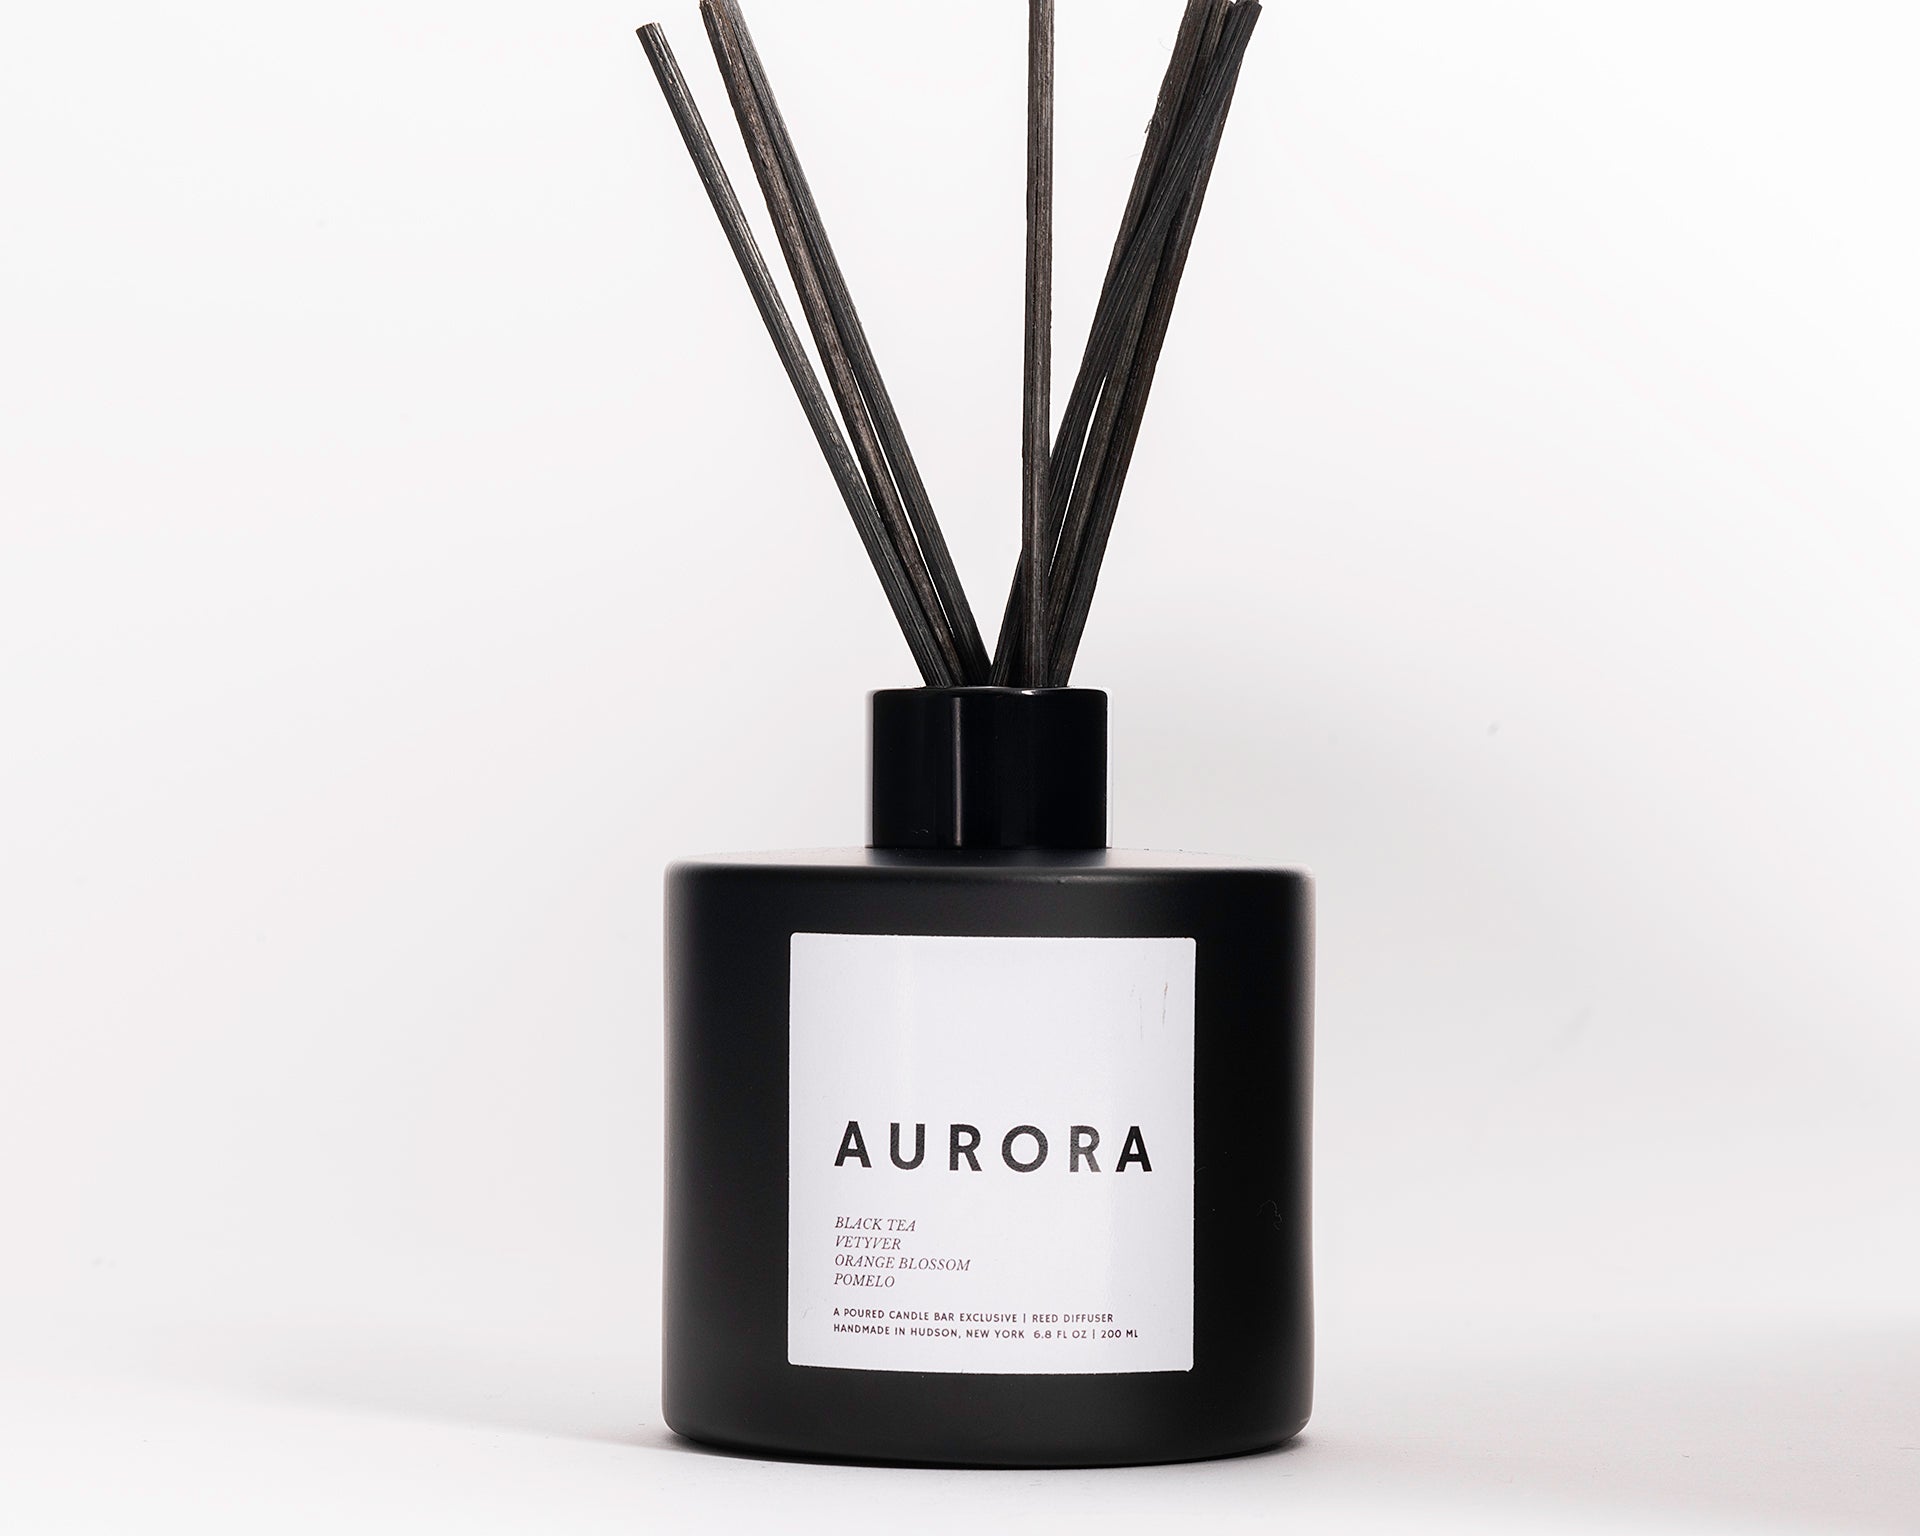 200 ml reed diffusers in a black circular glass vessel. Profile Description: Faintly sweet + herbal, with subtle hits of white floral + citrus  Notes: Black Tea, Vetyver Root, Orange Blossom, Pomelo